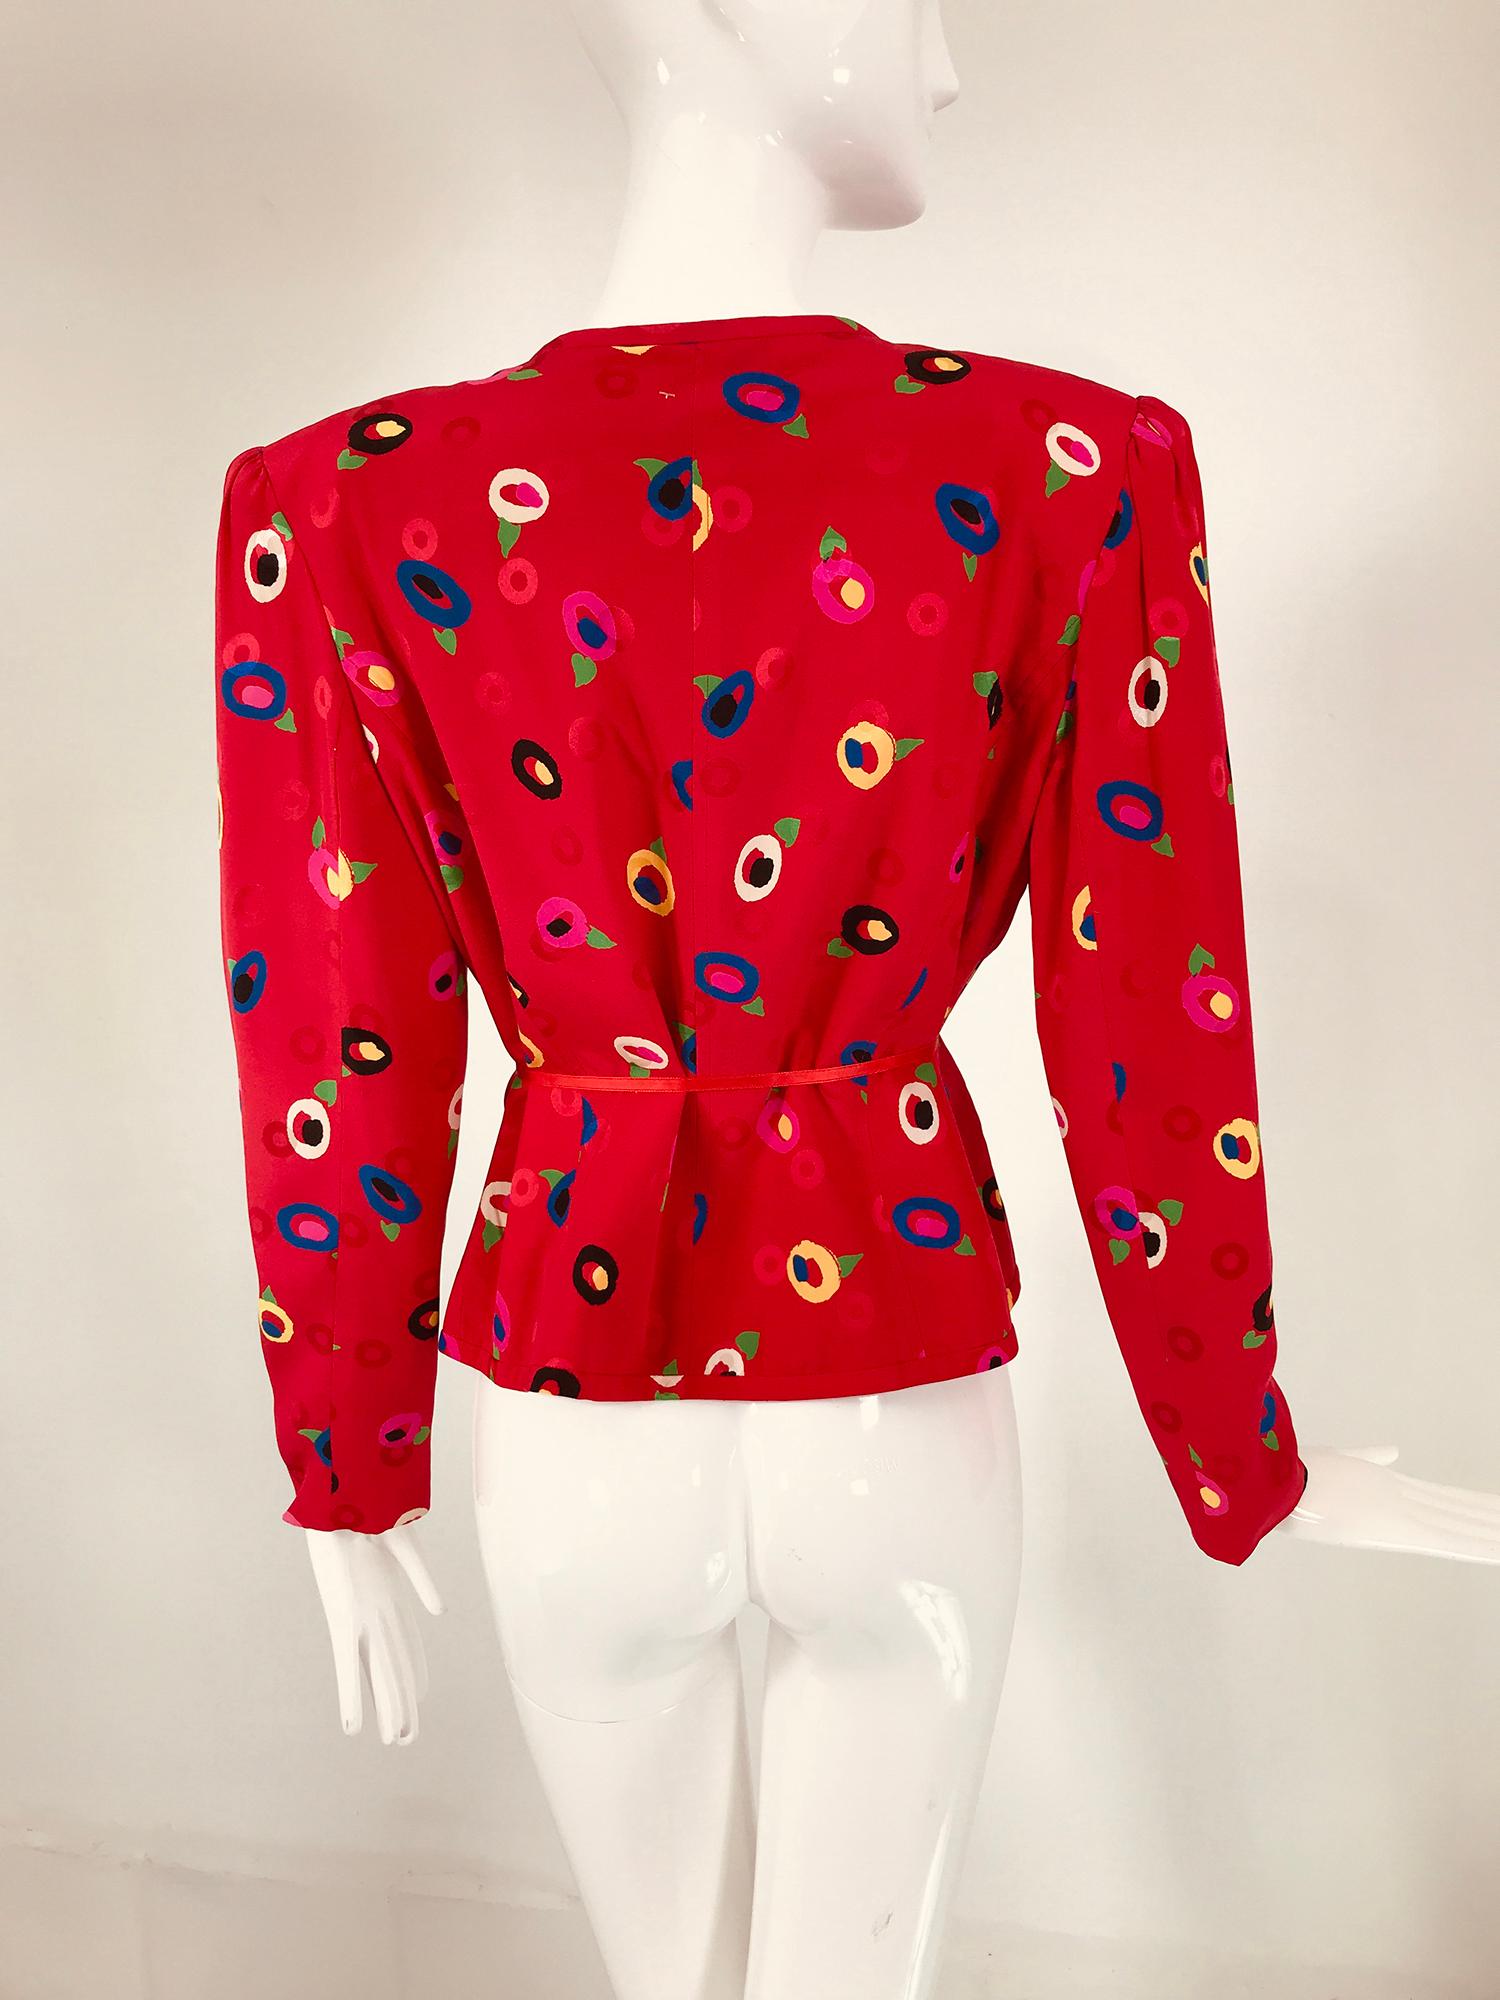 Ungaro Red Printed Silk Jacquard V Neck Button Front Jacket 1980s For Sale 3